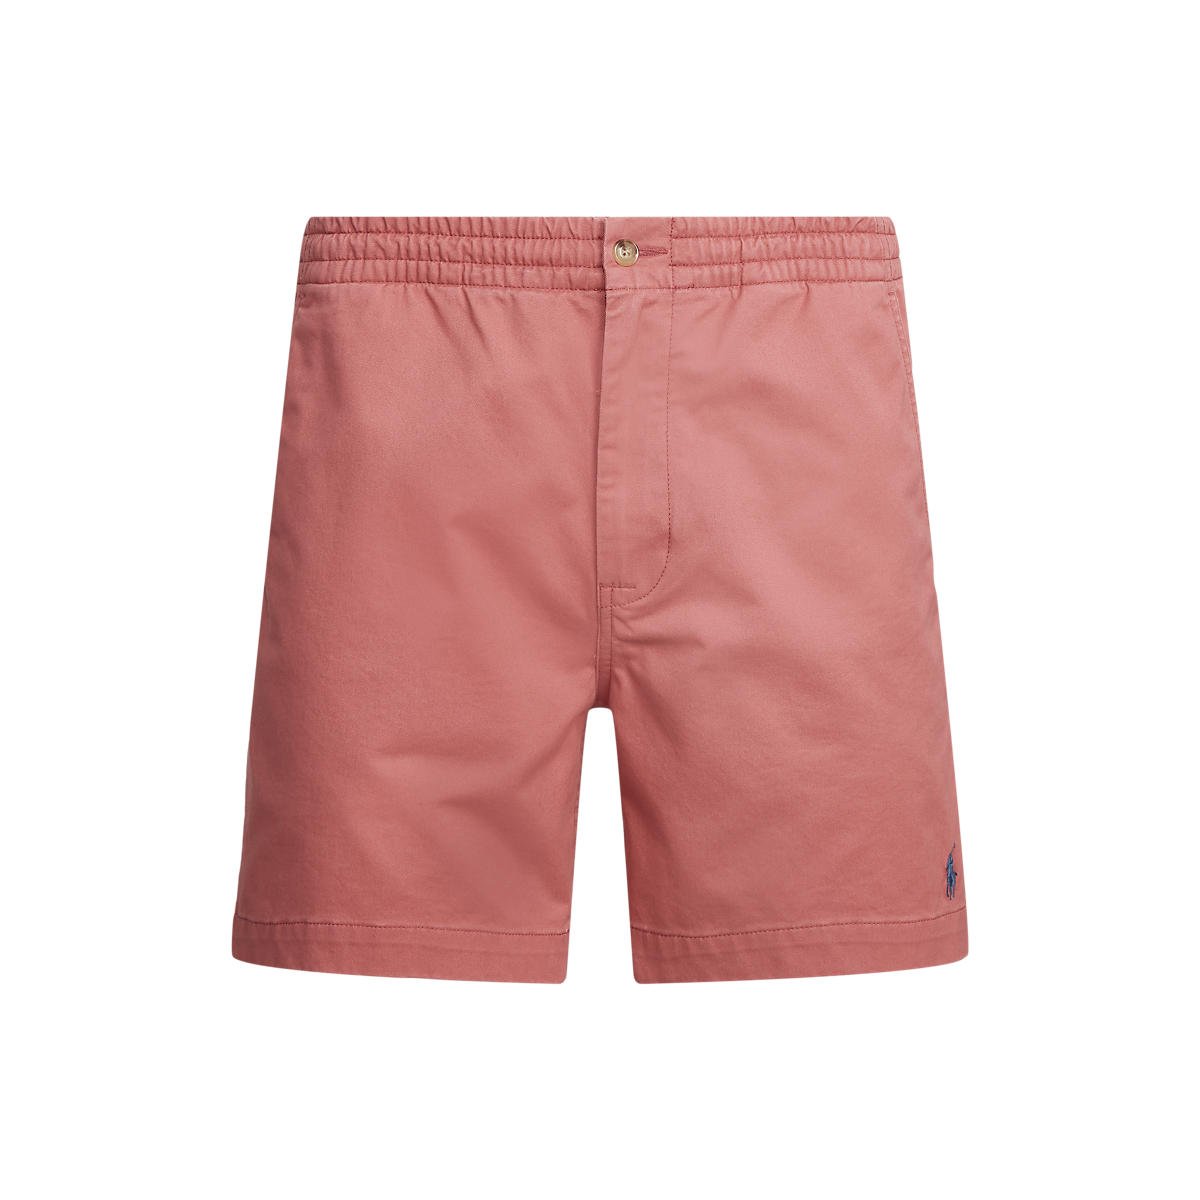 710644995046 Polo Ralph Lauren 6-Inch Polo Prepster Stretch Chino Short Berry, P3,605 from P5,150.jpeg